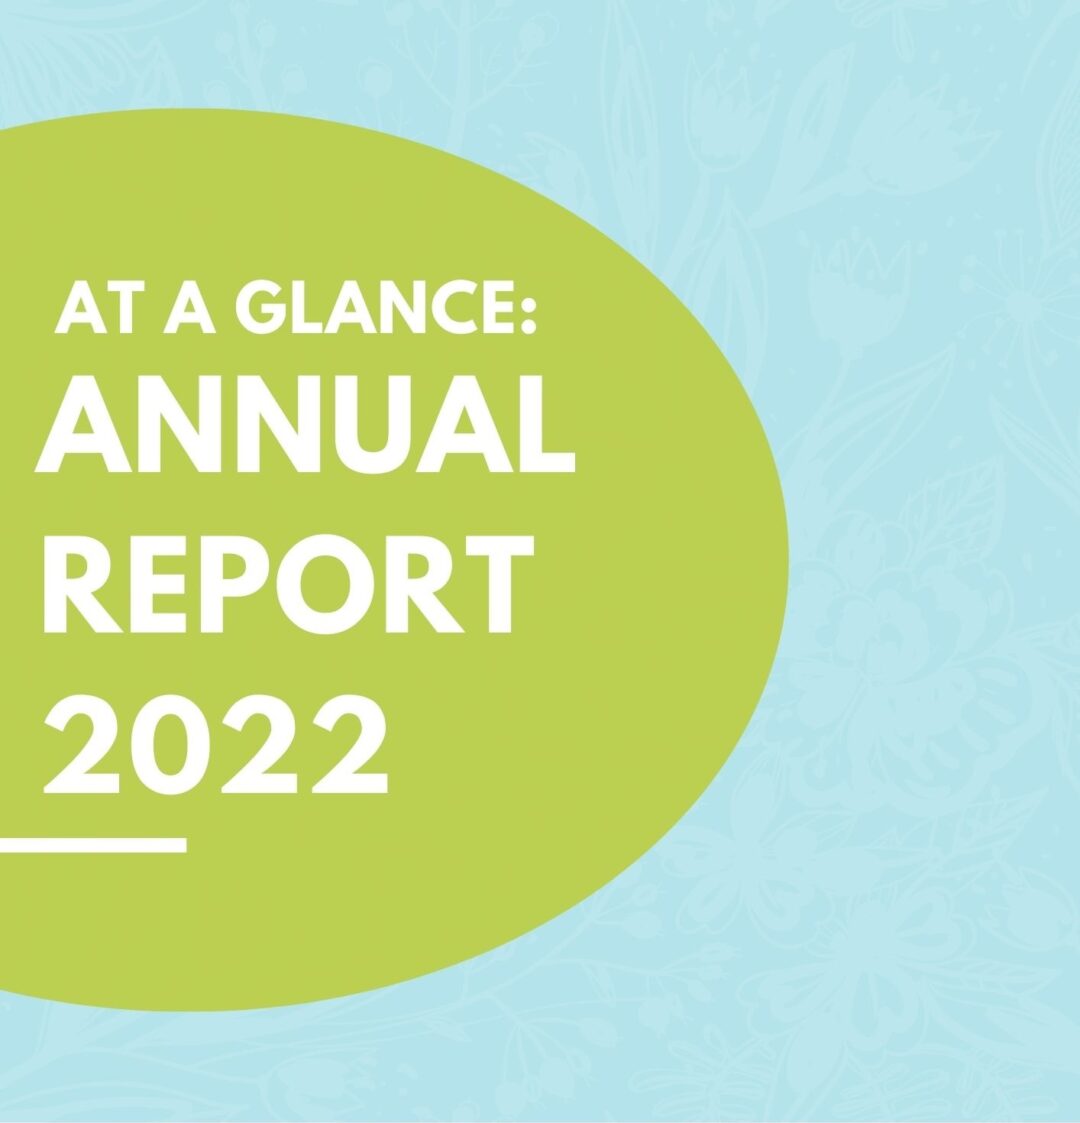 Annual Report 2022 Pathways Serious Mental Illness Society